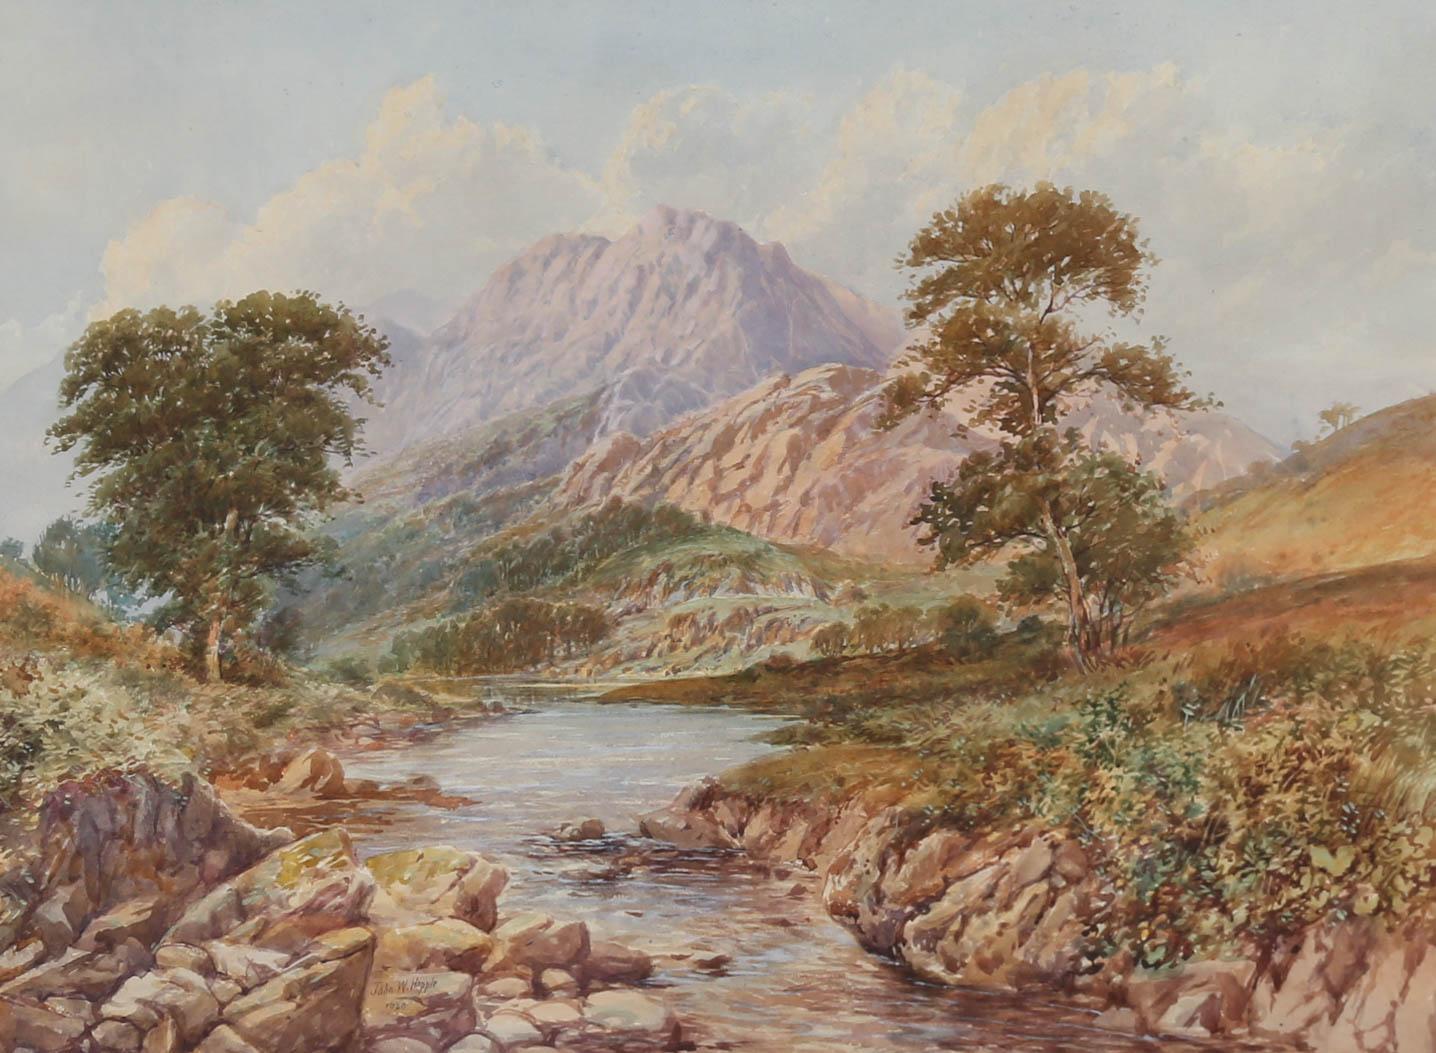 A fine and delicate watercolour painting by John Wilson Hepple (1886-1939), depicting a rocky river scene with mountains in the distance. Signed and dated within the composition. Elegantly presented in a simple gilt frame and wash-line mount. On